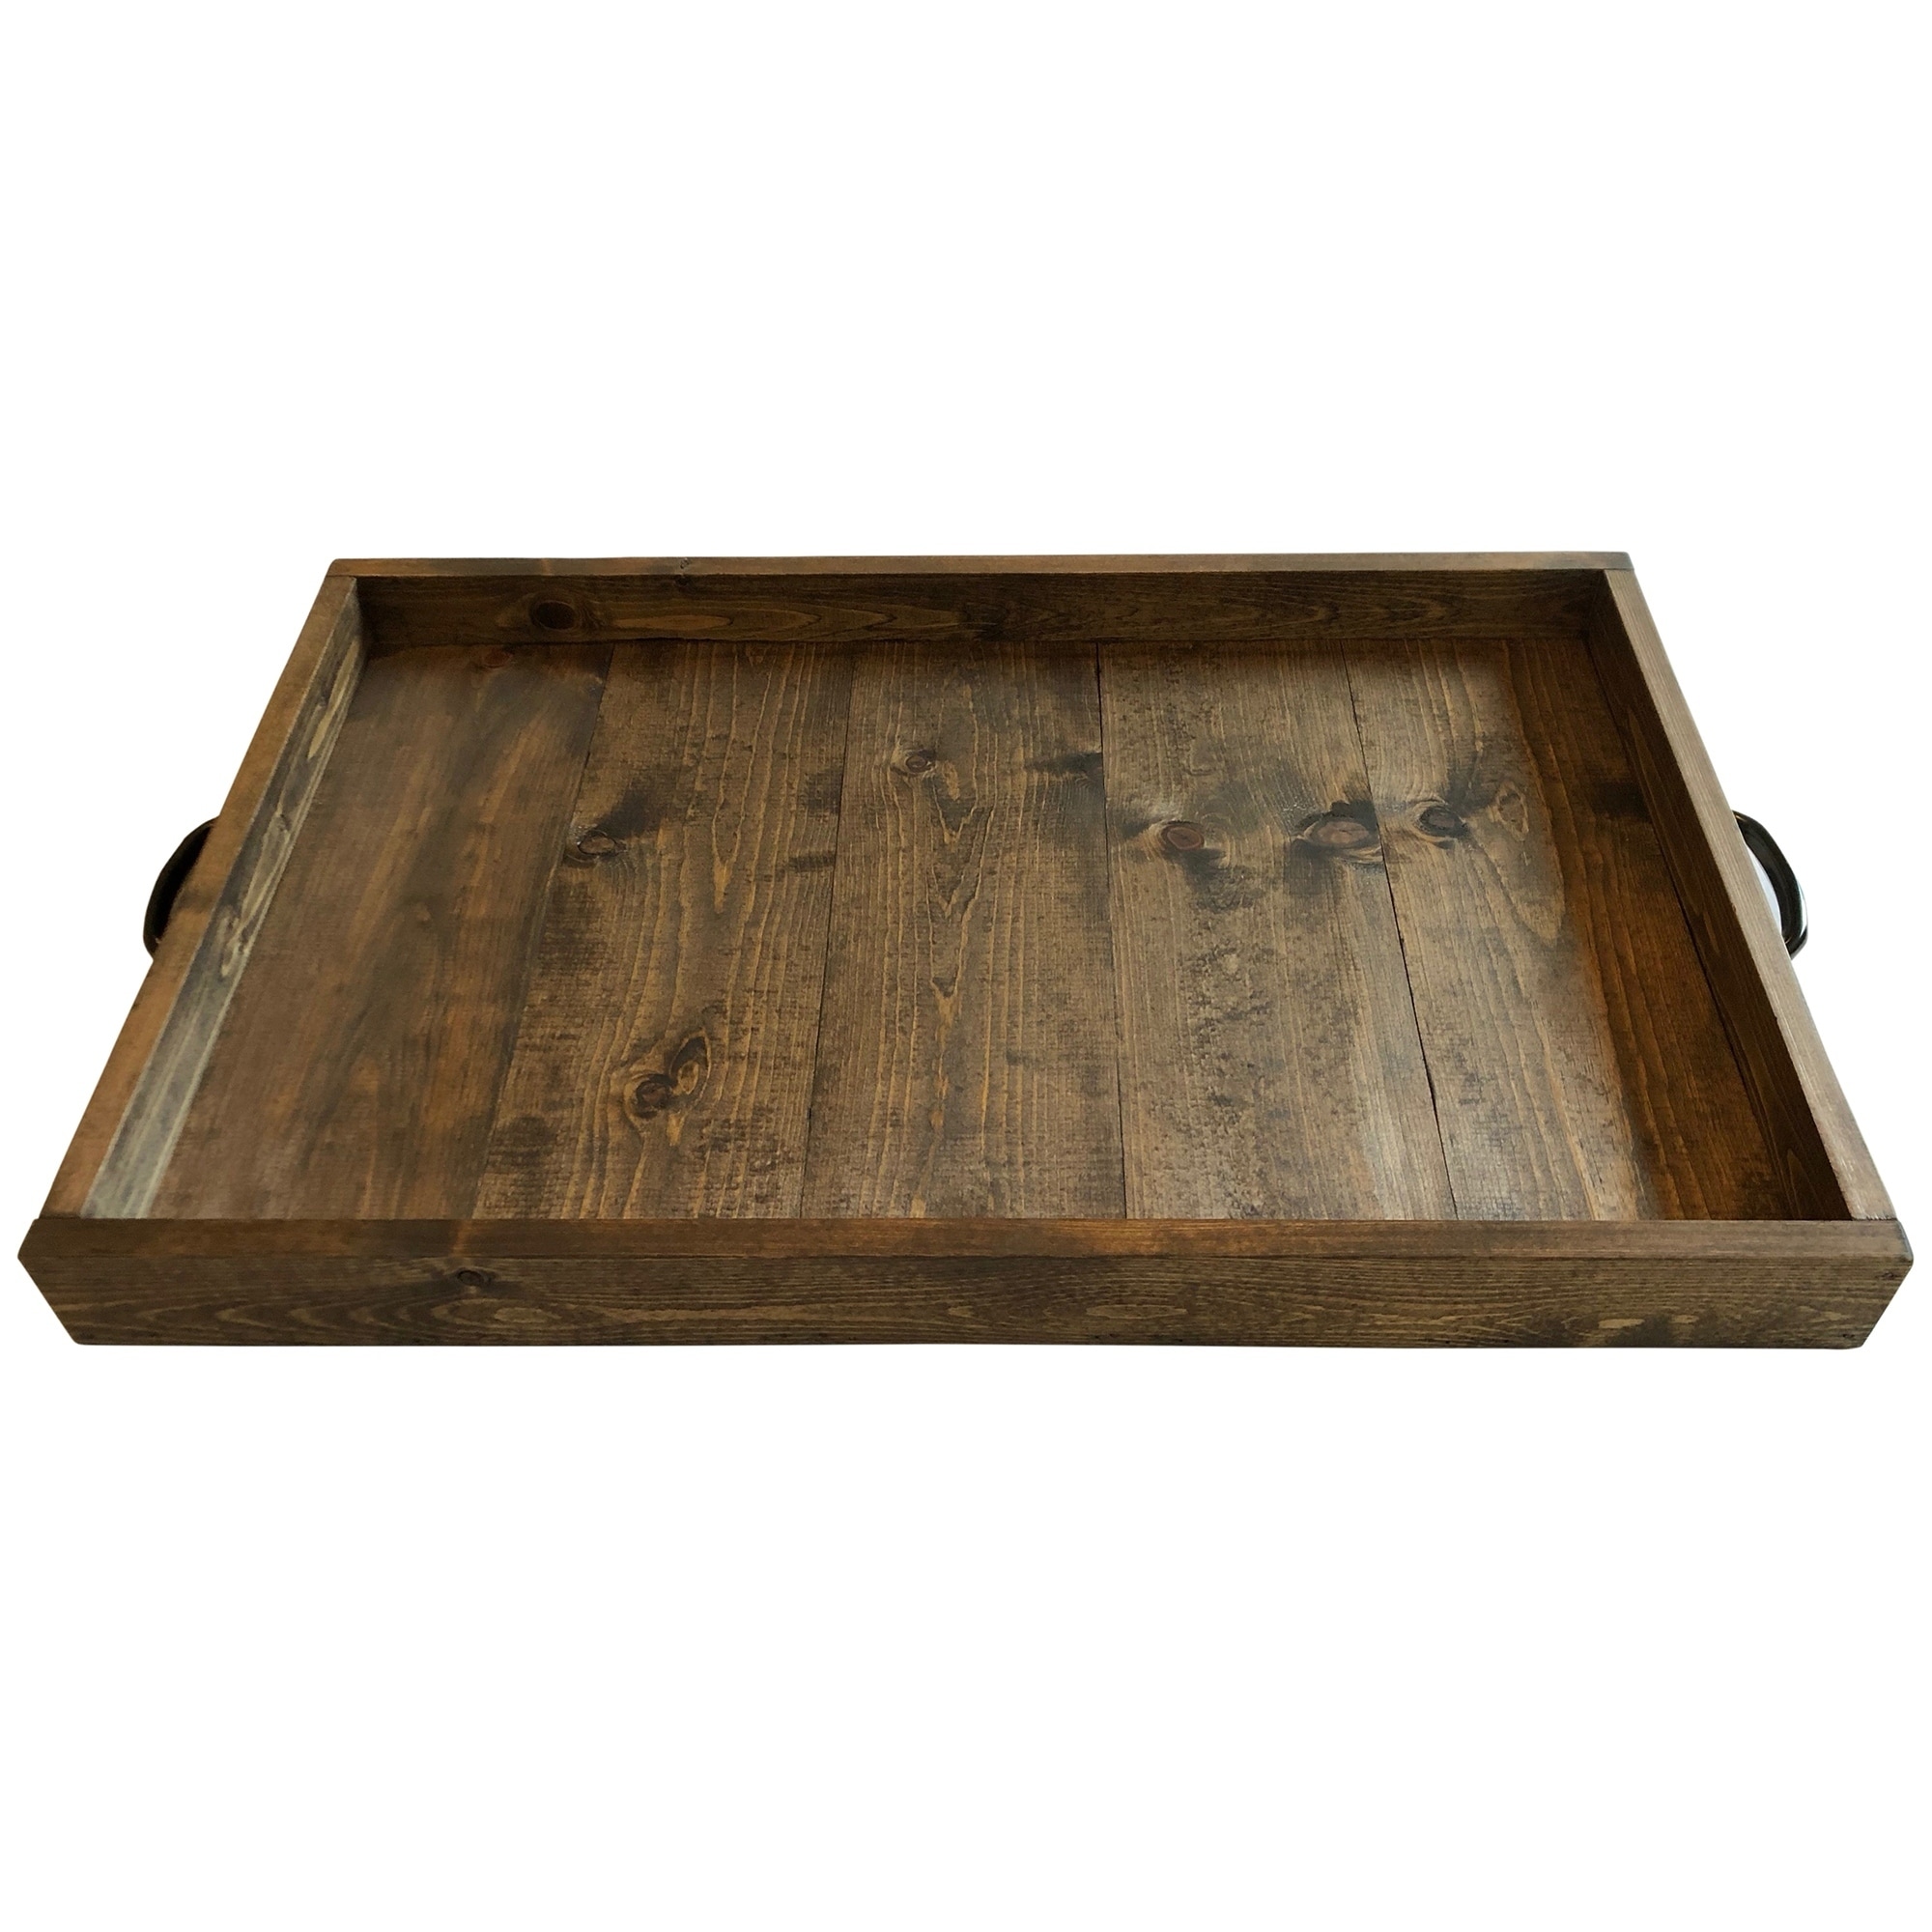 Shop Wooden Tray Farmhouse Style Free Shipping Today Overstock